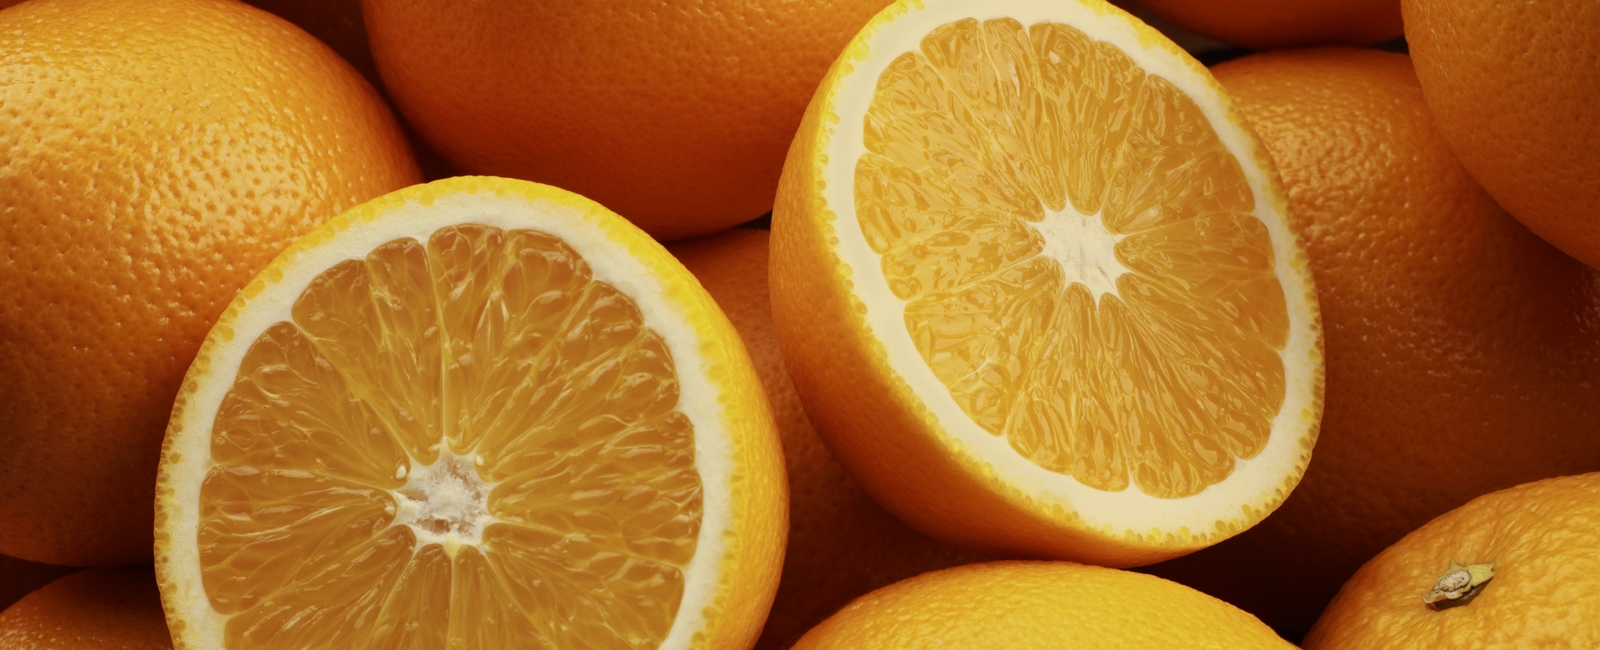 Role of Molybdenum in Citrus Production